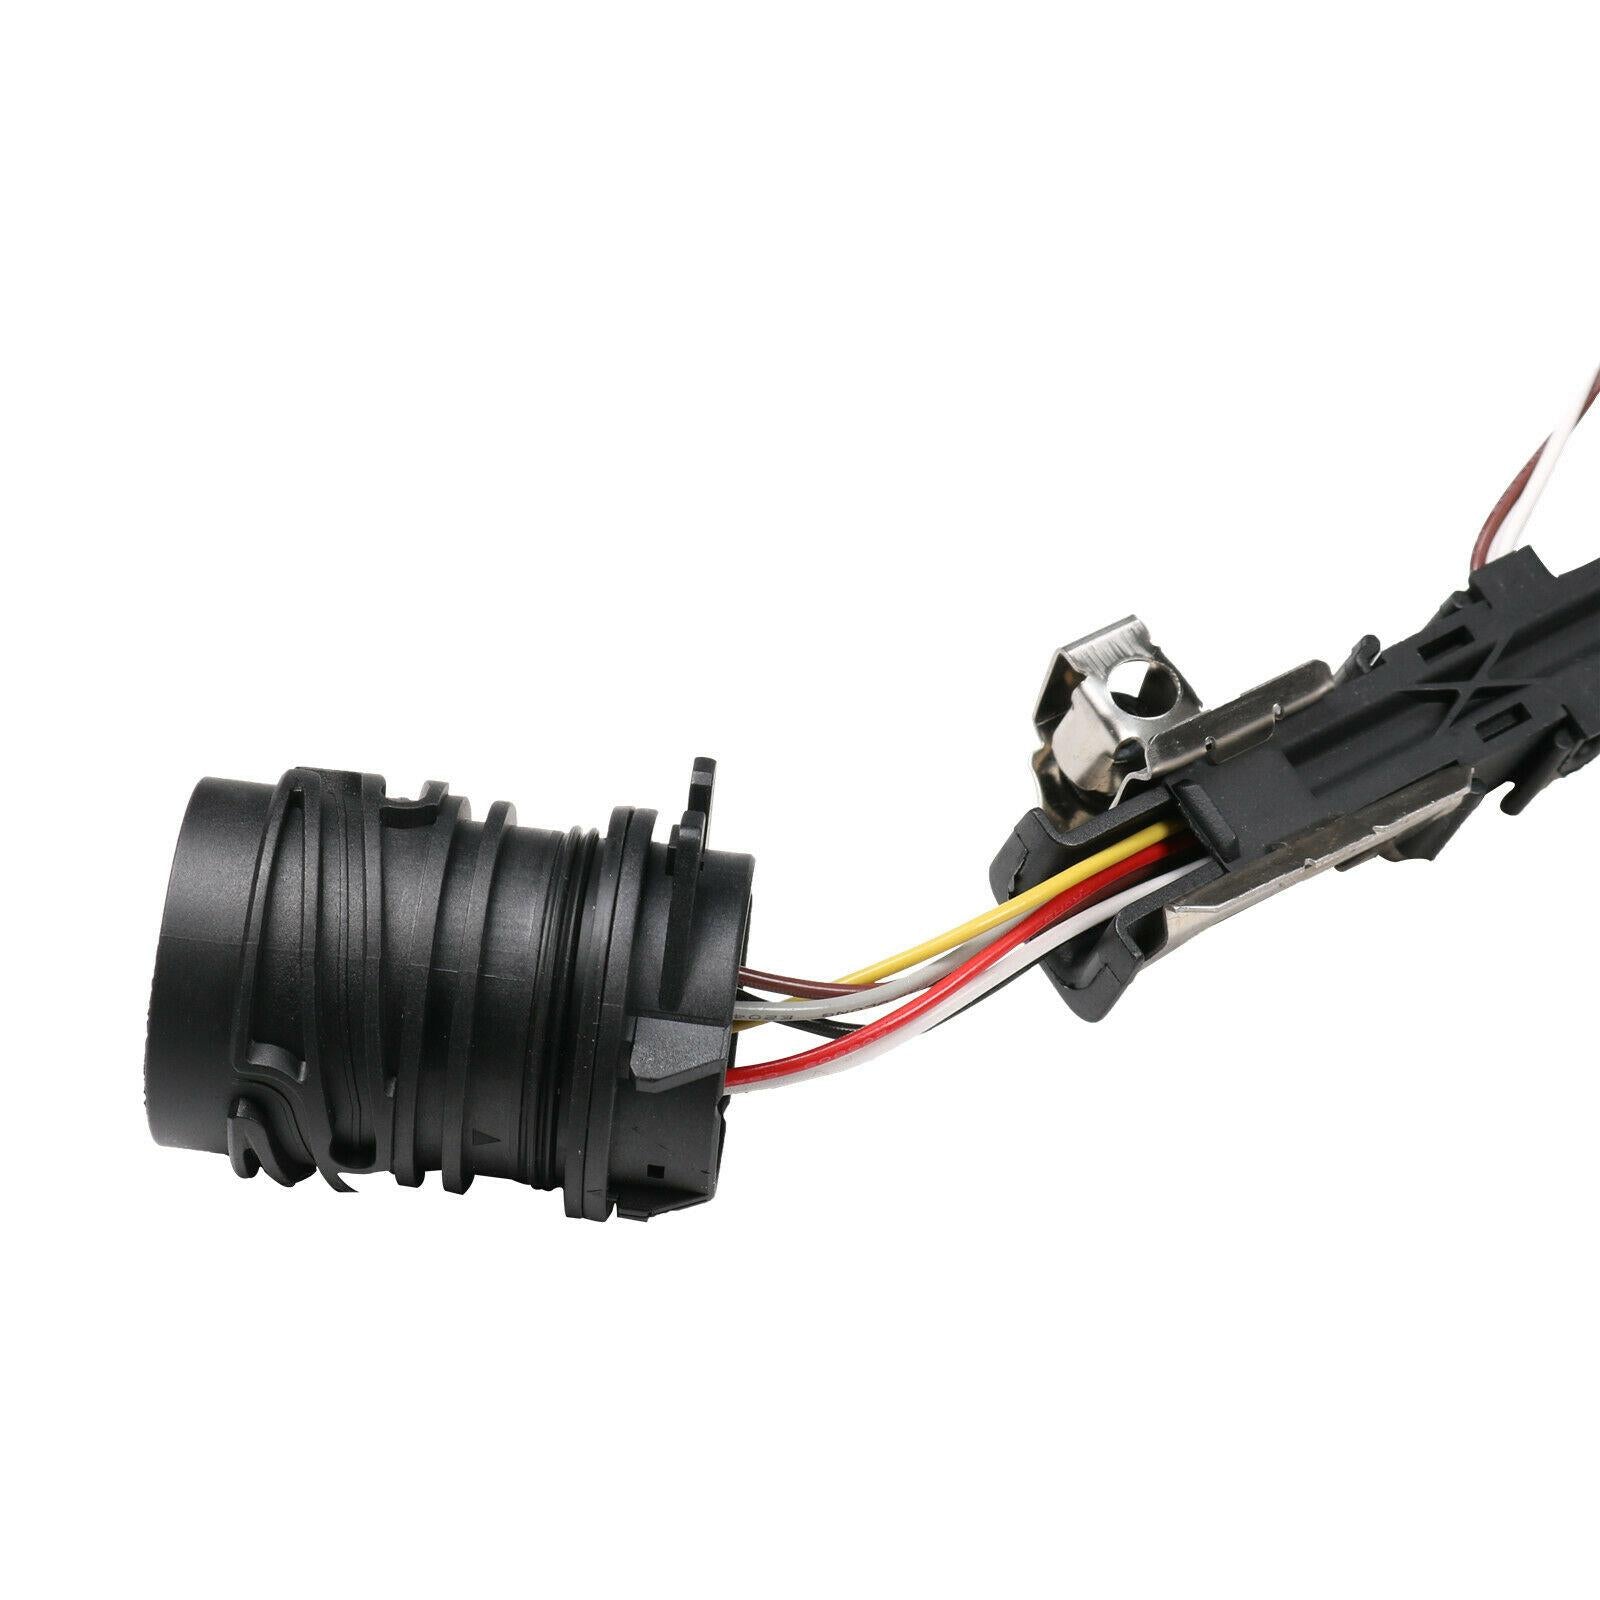 Injector Wiring Loom For Audi A3, A4, and A6, 038971600 - D2P Autoparts